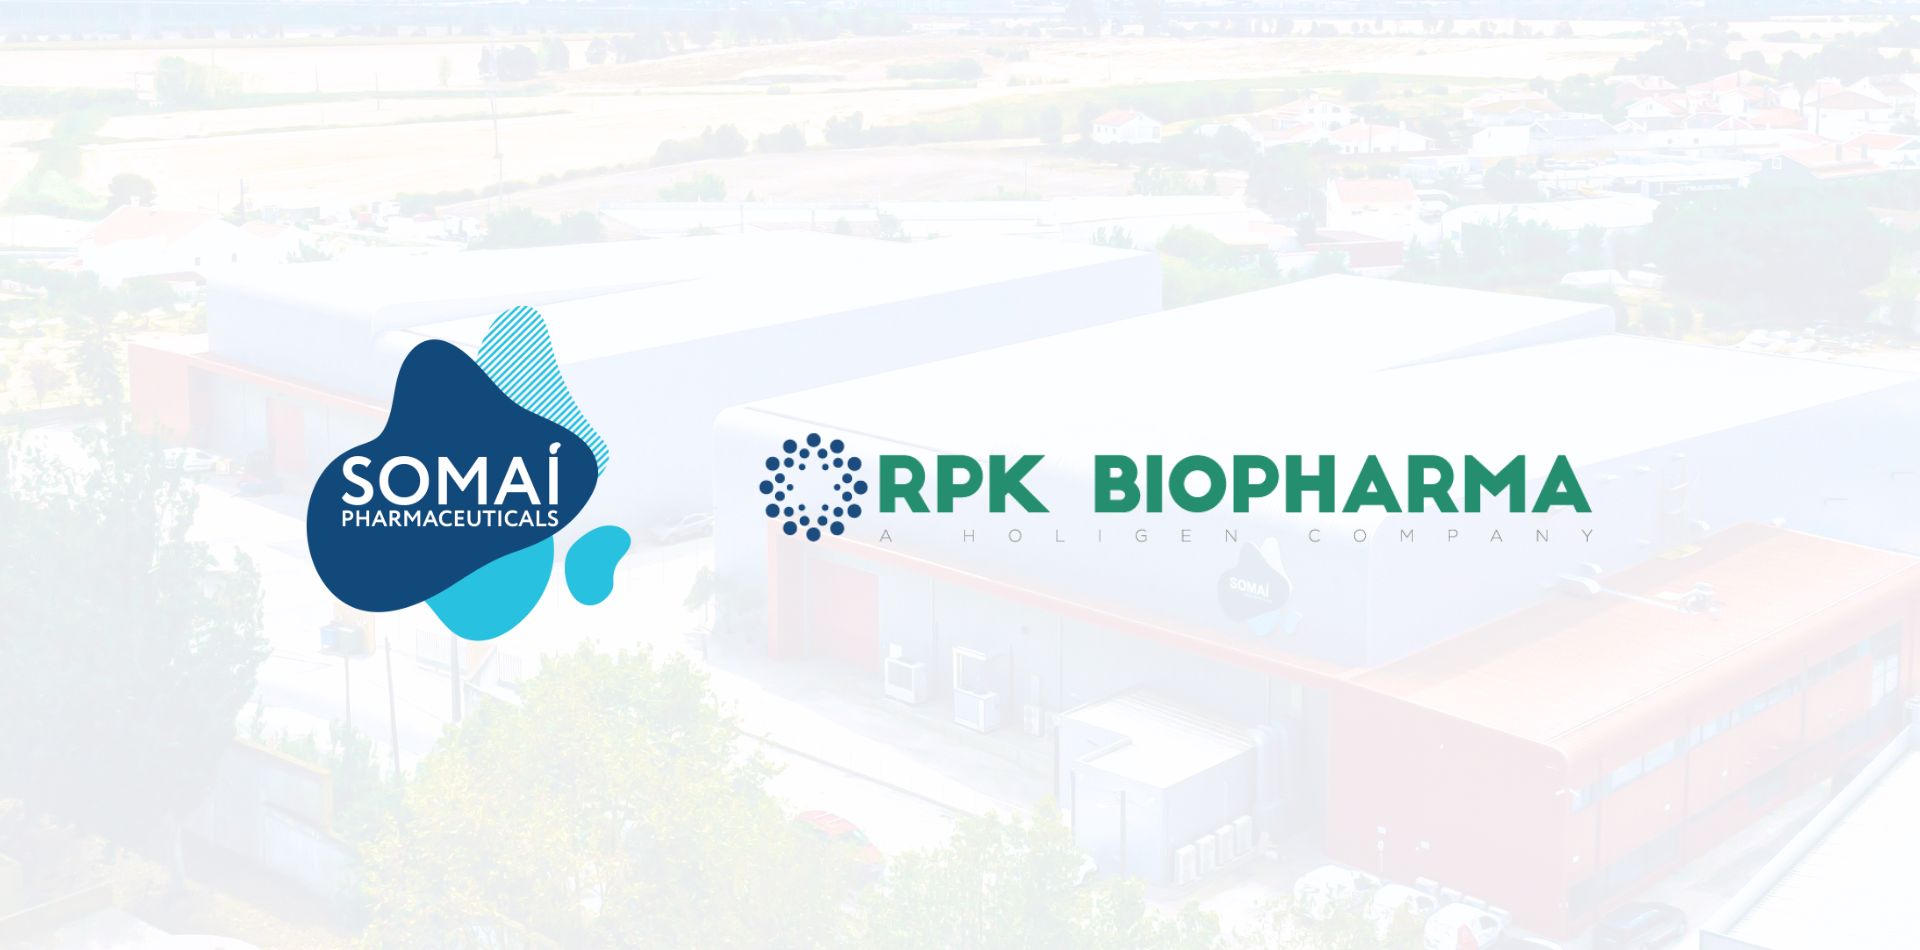 SOMAÍ Pharmaceuticals Acquires RPK Biopharma (Holigen), Reinforcing Global Leading Position in Medicinal Cannabis Sector